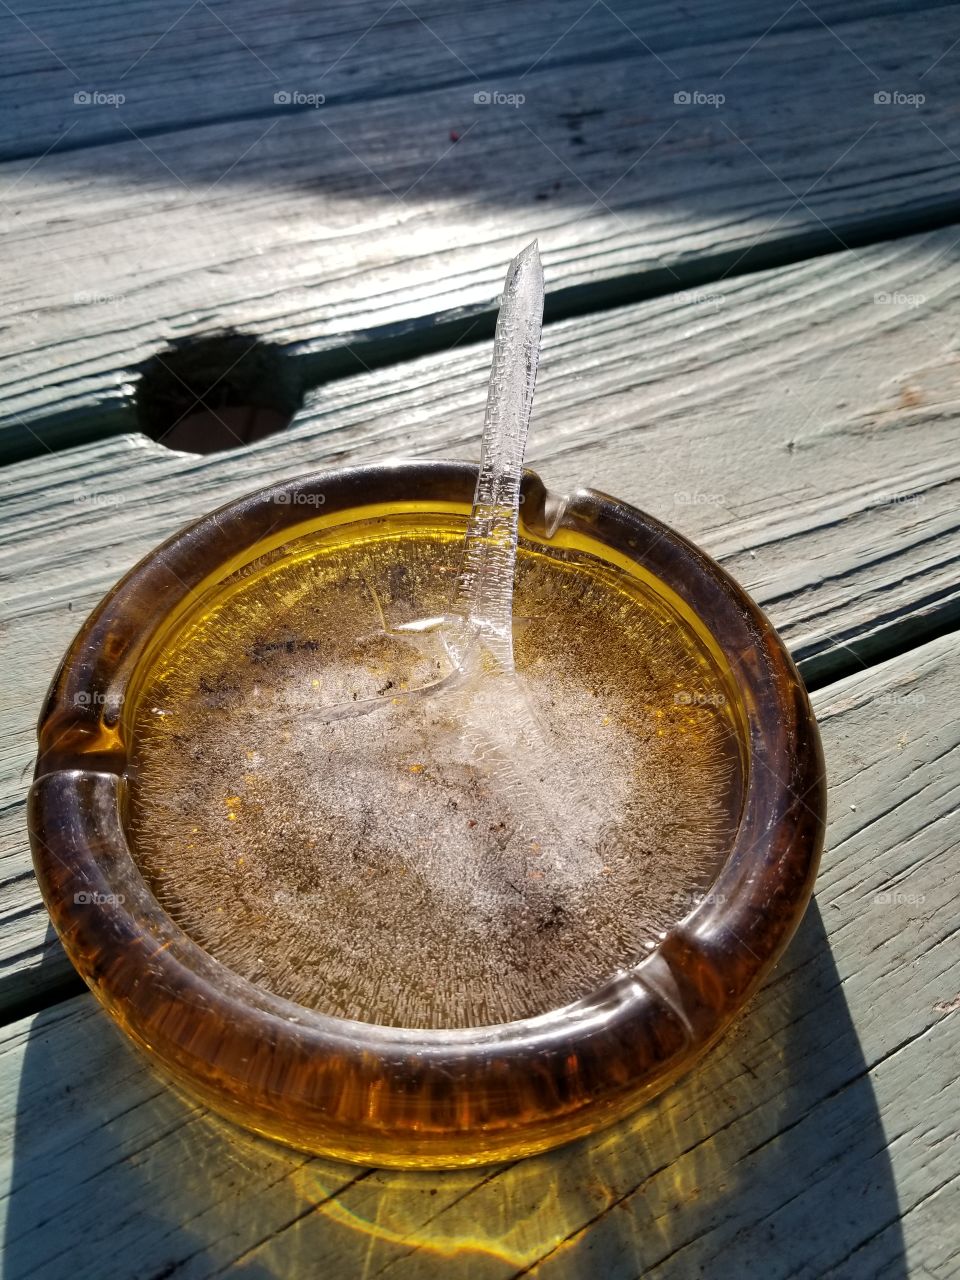 Ice in a ash tray in New Jersey